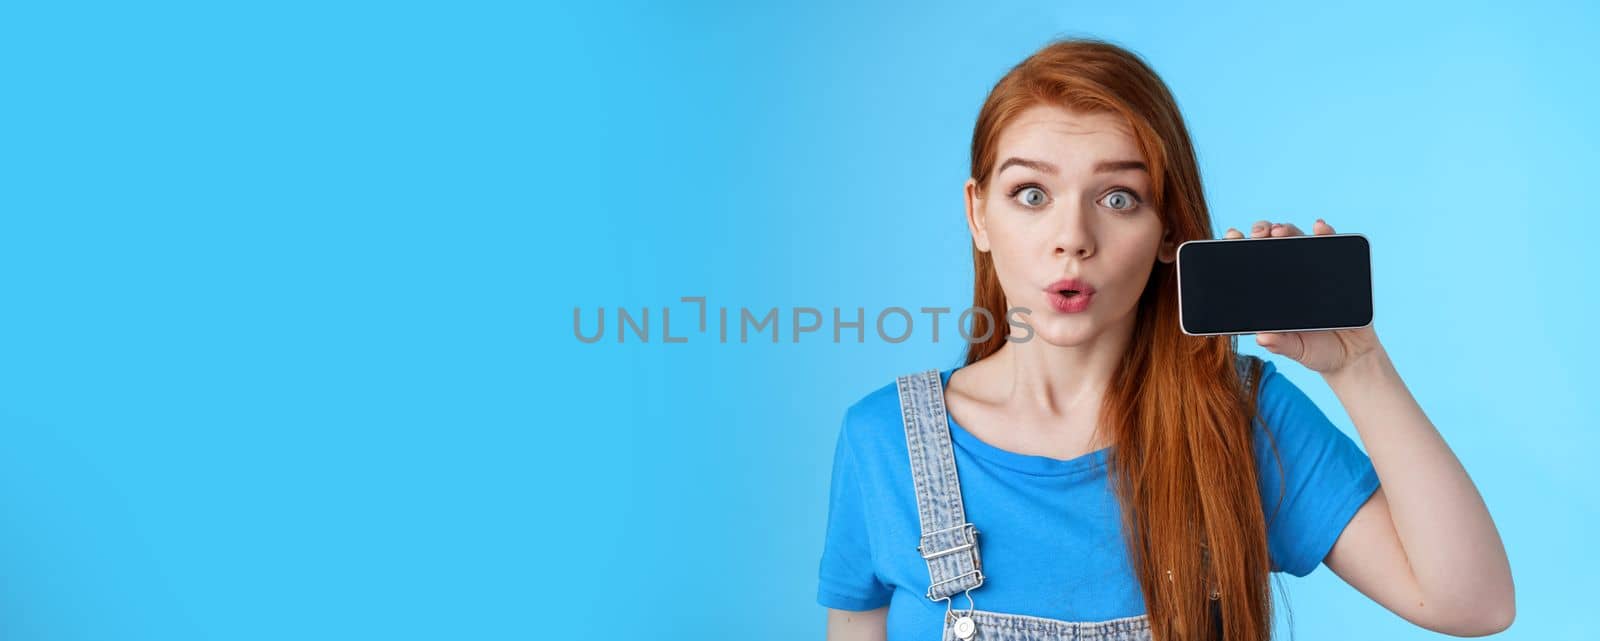 Amazed fascinated excited 20s redhead woman show smartphone screen horizontally, fold lips whistling amused wondered, check out cool phone app, stand blue background curious. Copy space